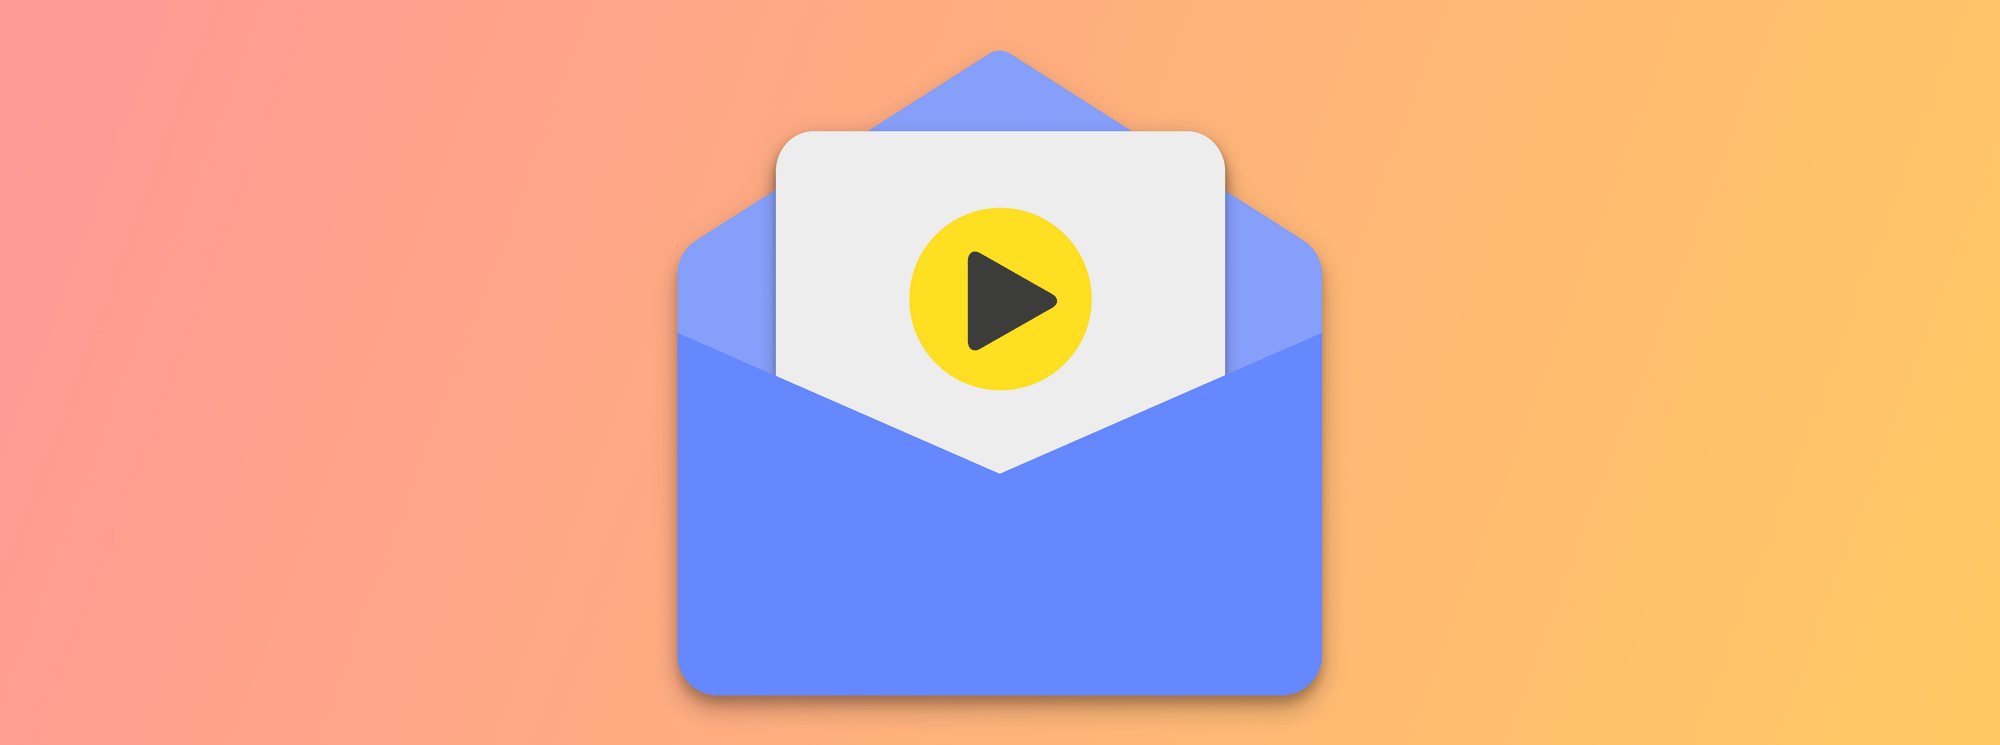 Top 7 Ways to Use Video in Email Marketing